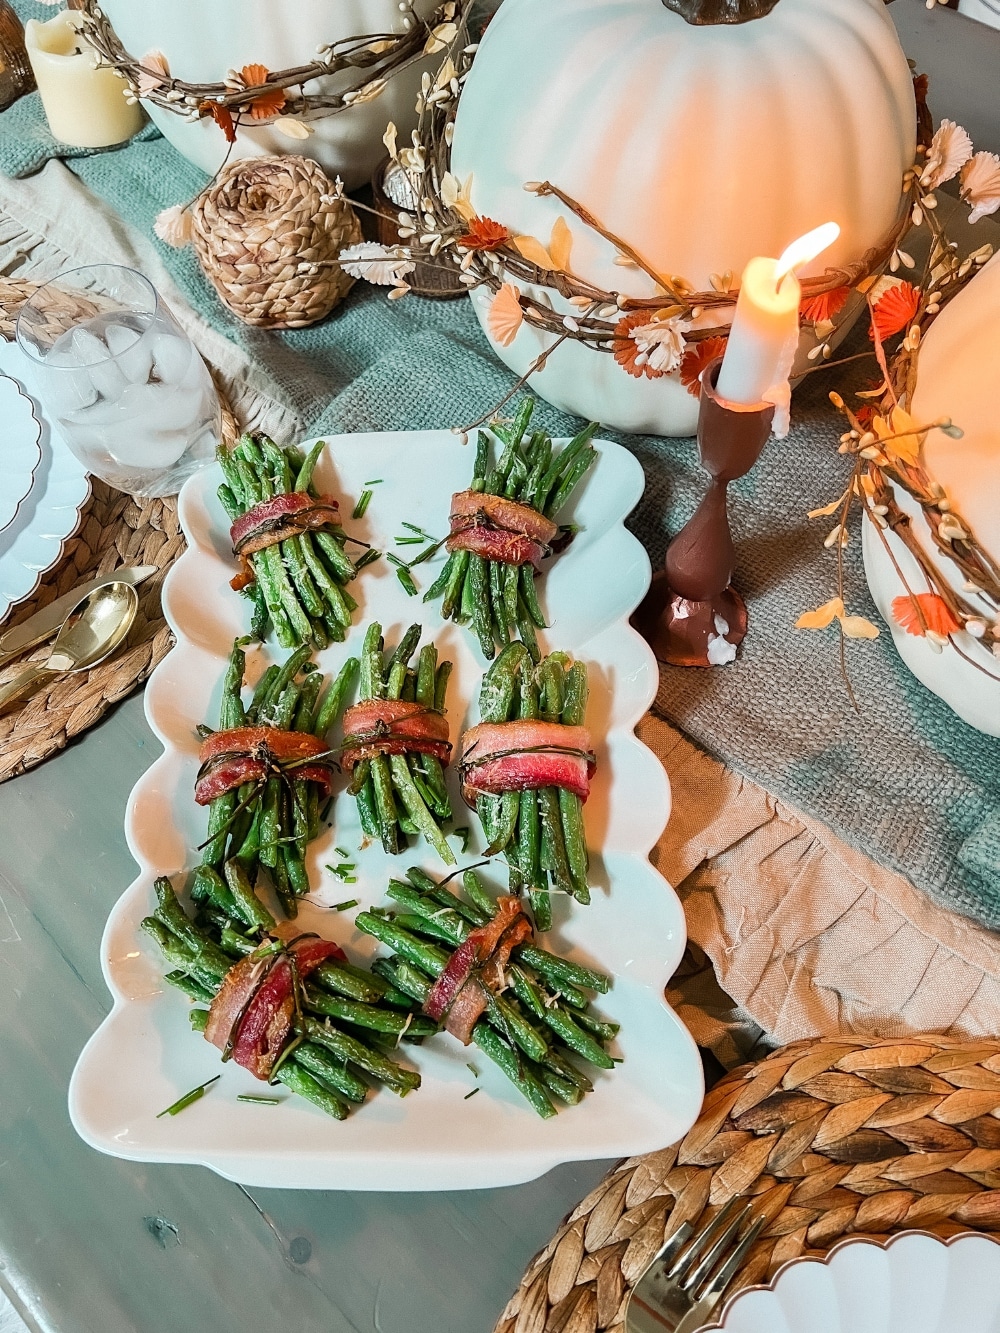 Bacon-Wrapped Green Bean Bundles. The perfect side dish for Thanksgiving or any holiday, these delicate green beans are layered with a garlic glaze and wrapped in crispy bacon with a chive bow. 